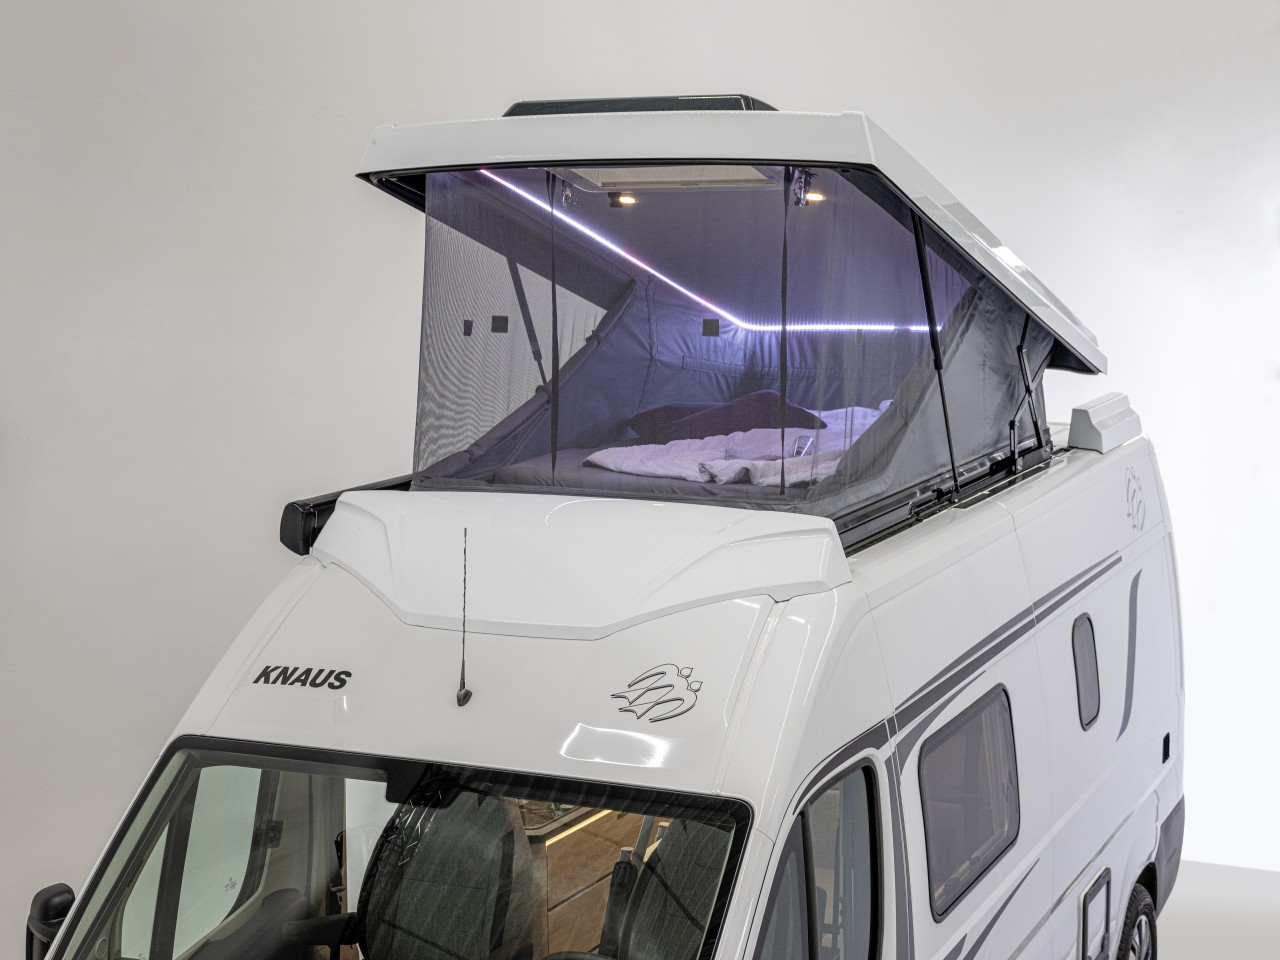 The large wraparound window and ambient lighting combine to make the new pop-top a comfortable and stylish place to spend the night